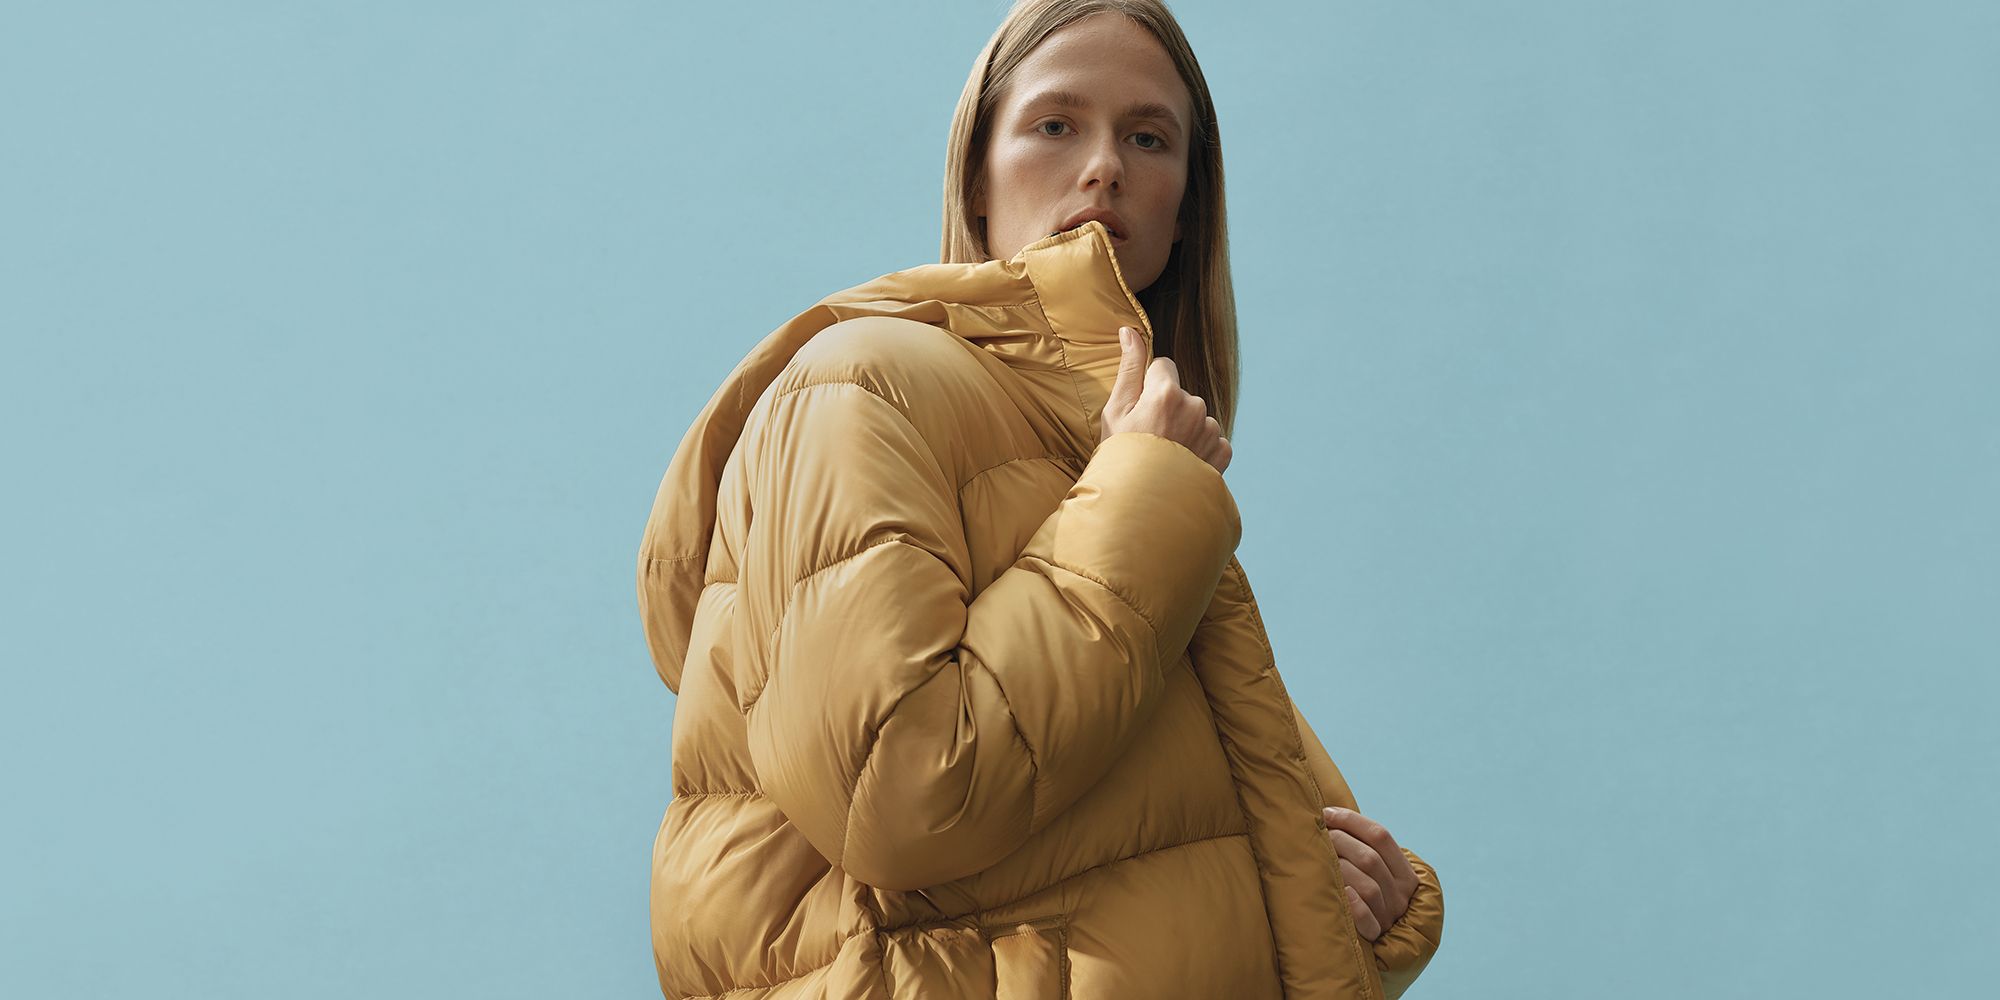 Everlane's ReNew Jacket and Outerwear